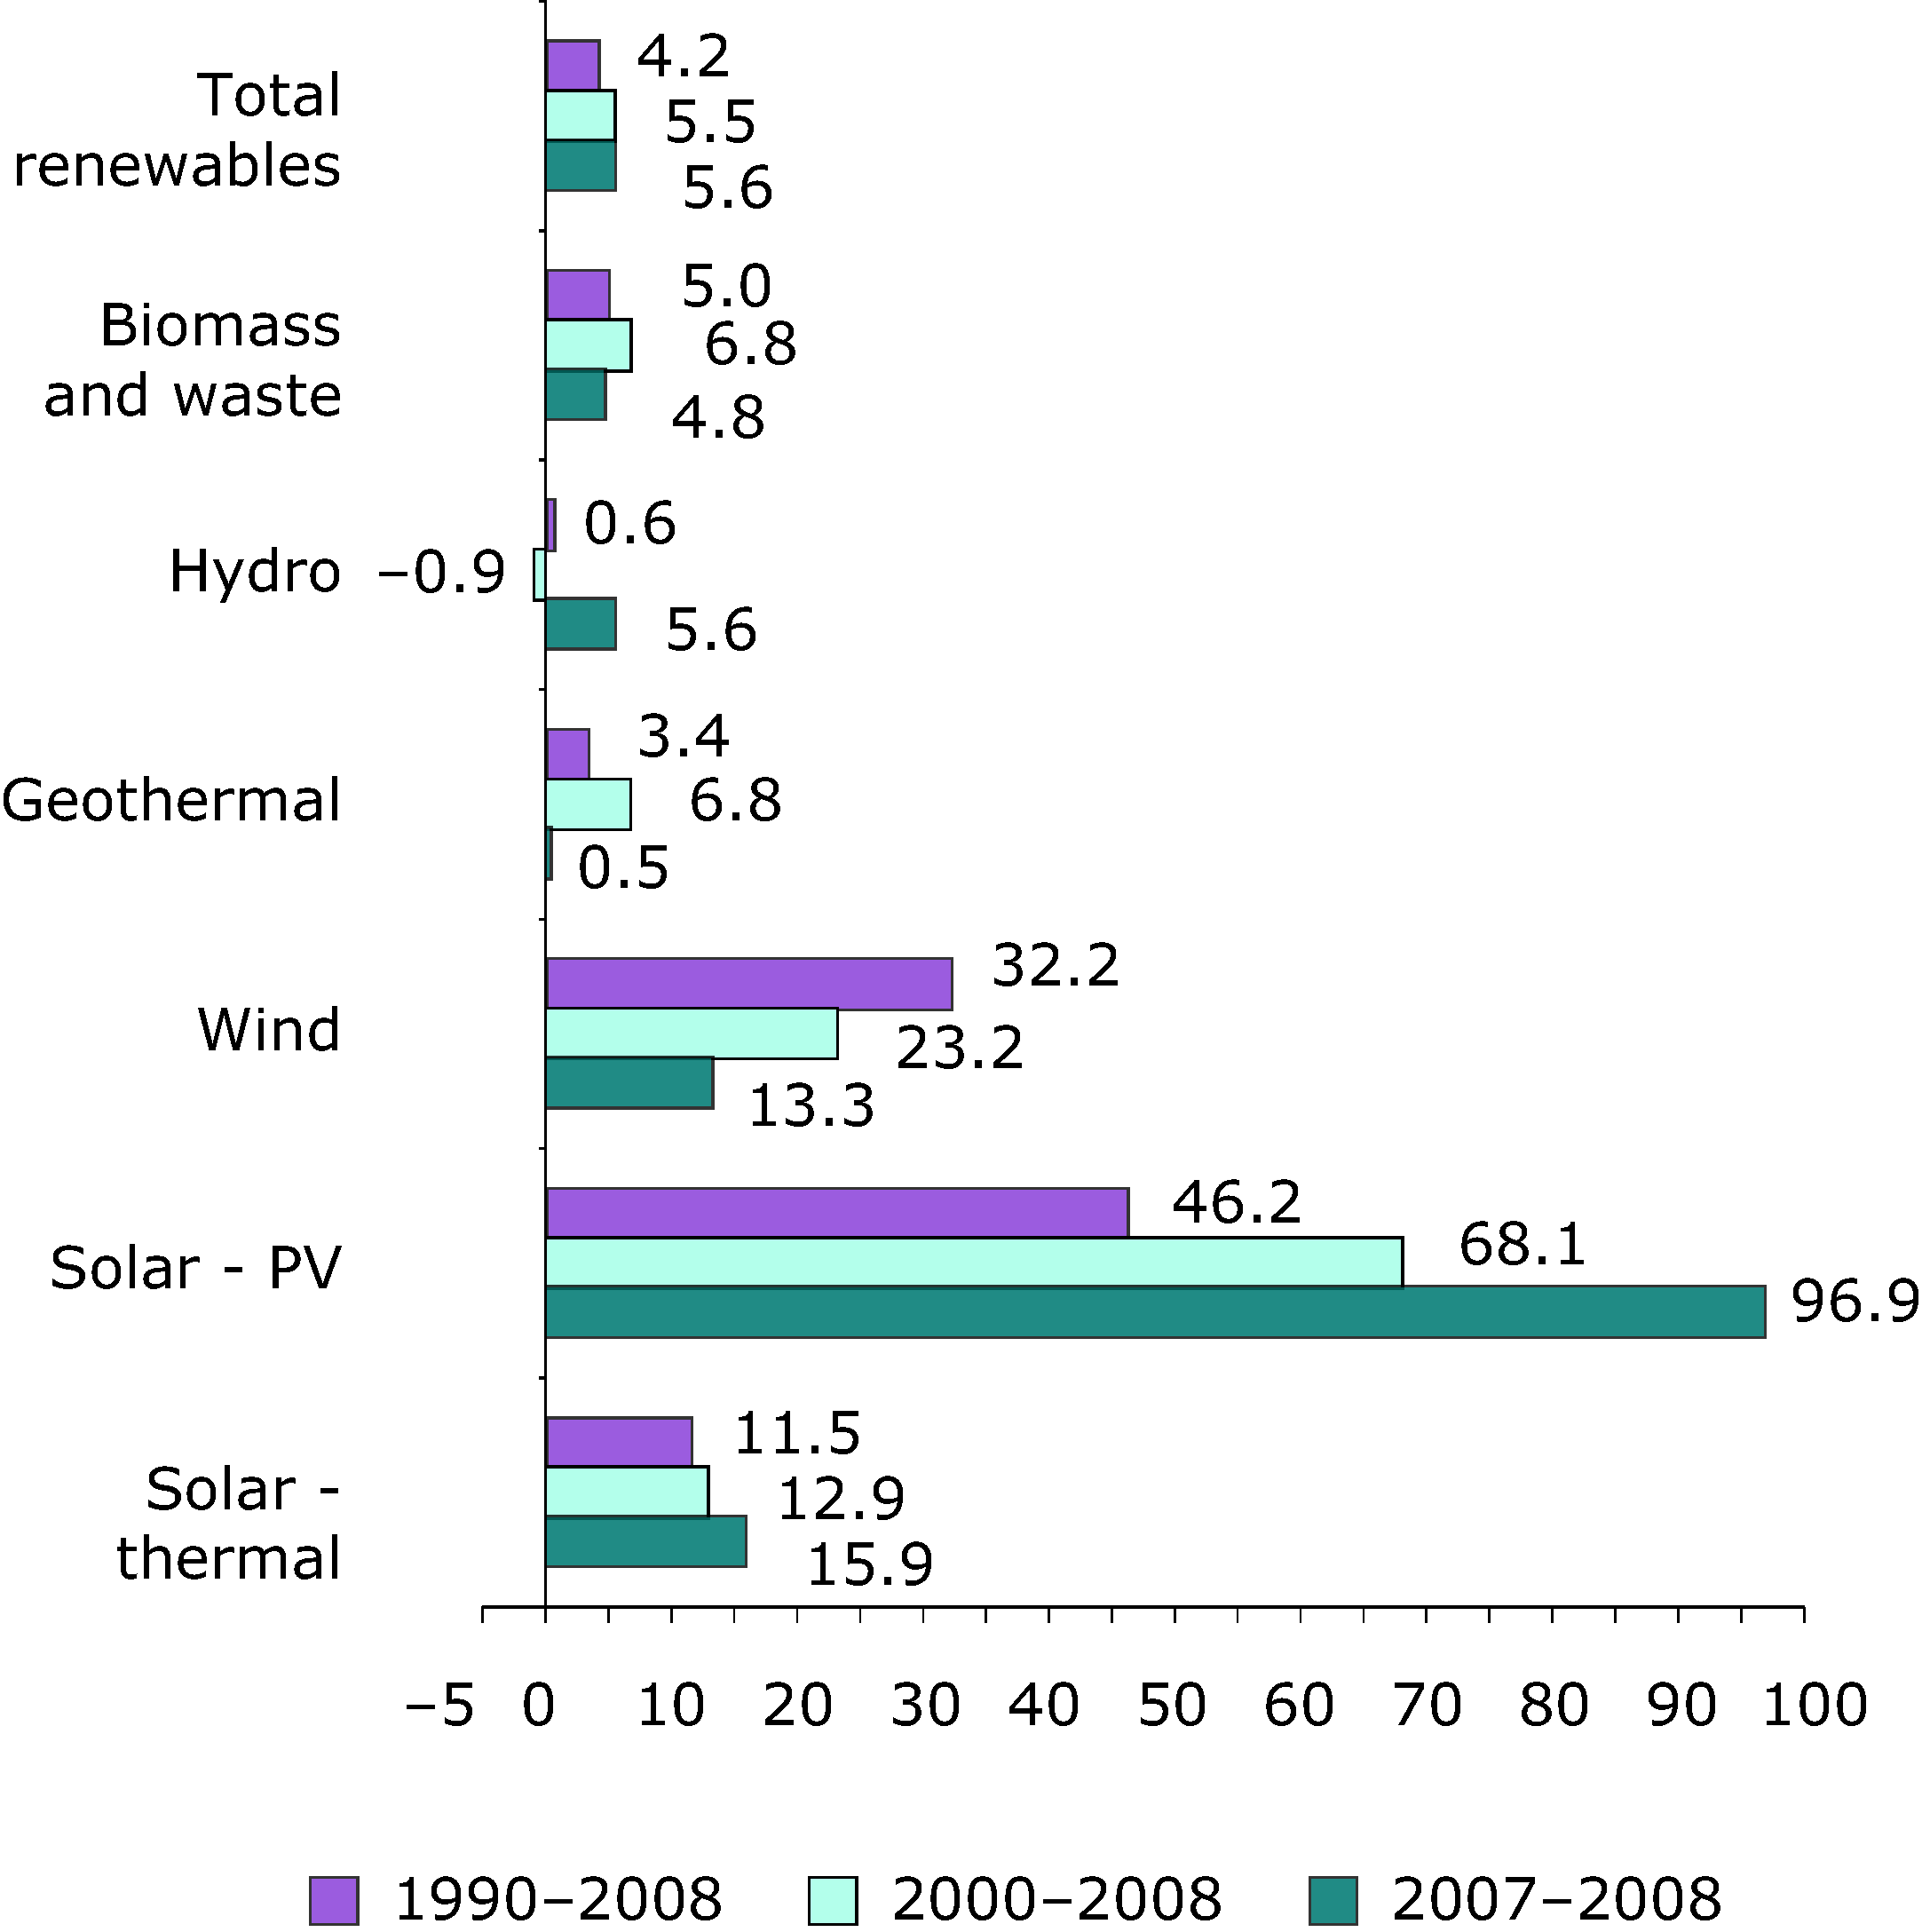 Annual average growth rates in renewable energy consumption (%), EU-27